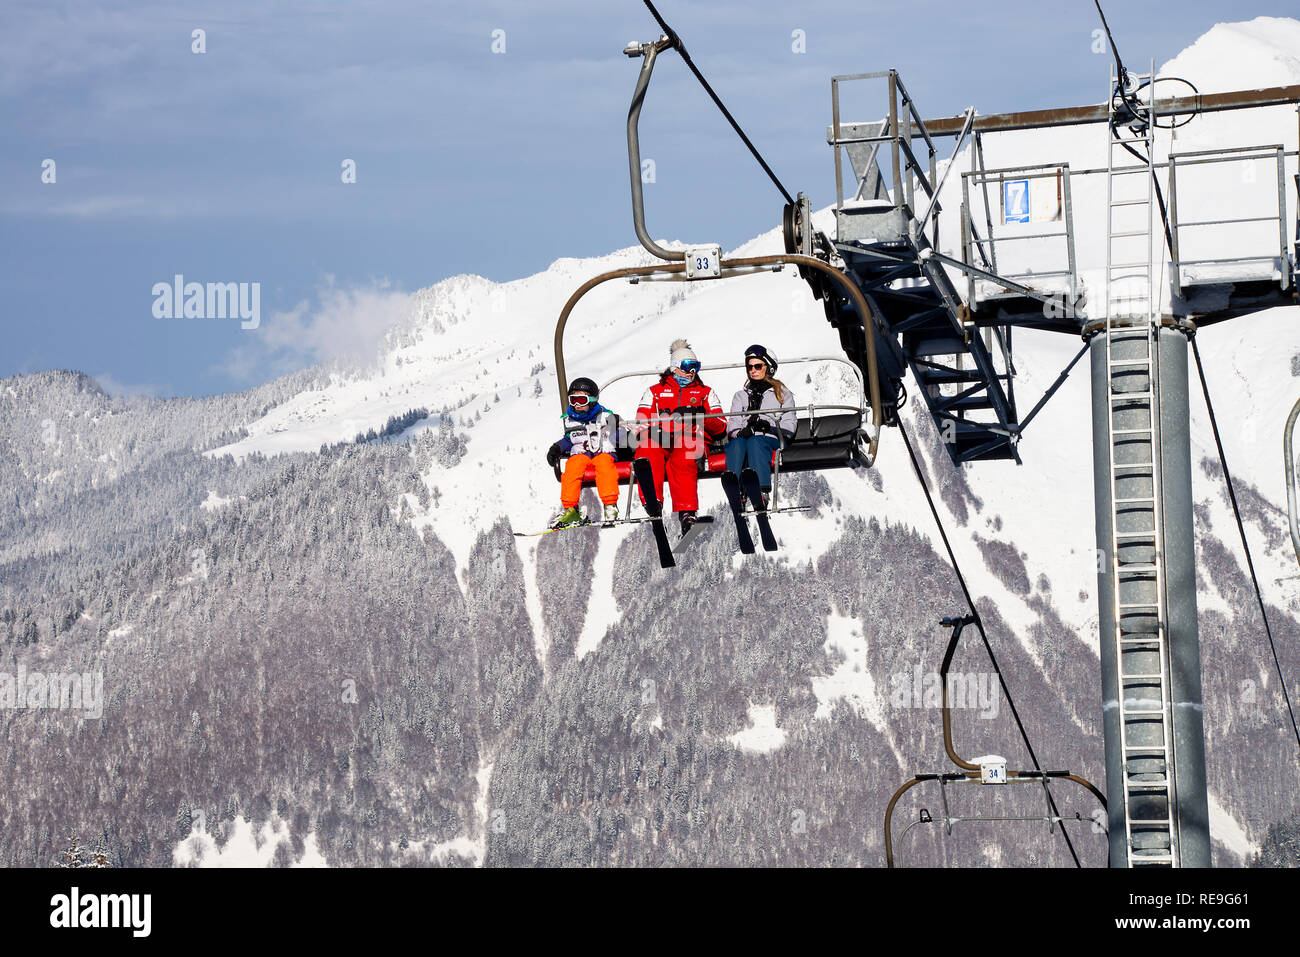 The Mouilles Chairlift Transporting Skiers up the Ski Slopes to the Le Pleney Gondola Area in Mountains above Morzine Ski Resort Haute Savoie France Stock Photo